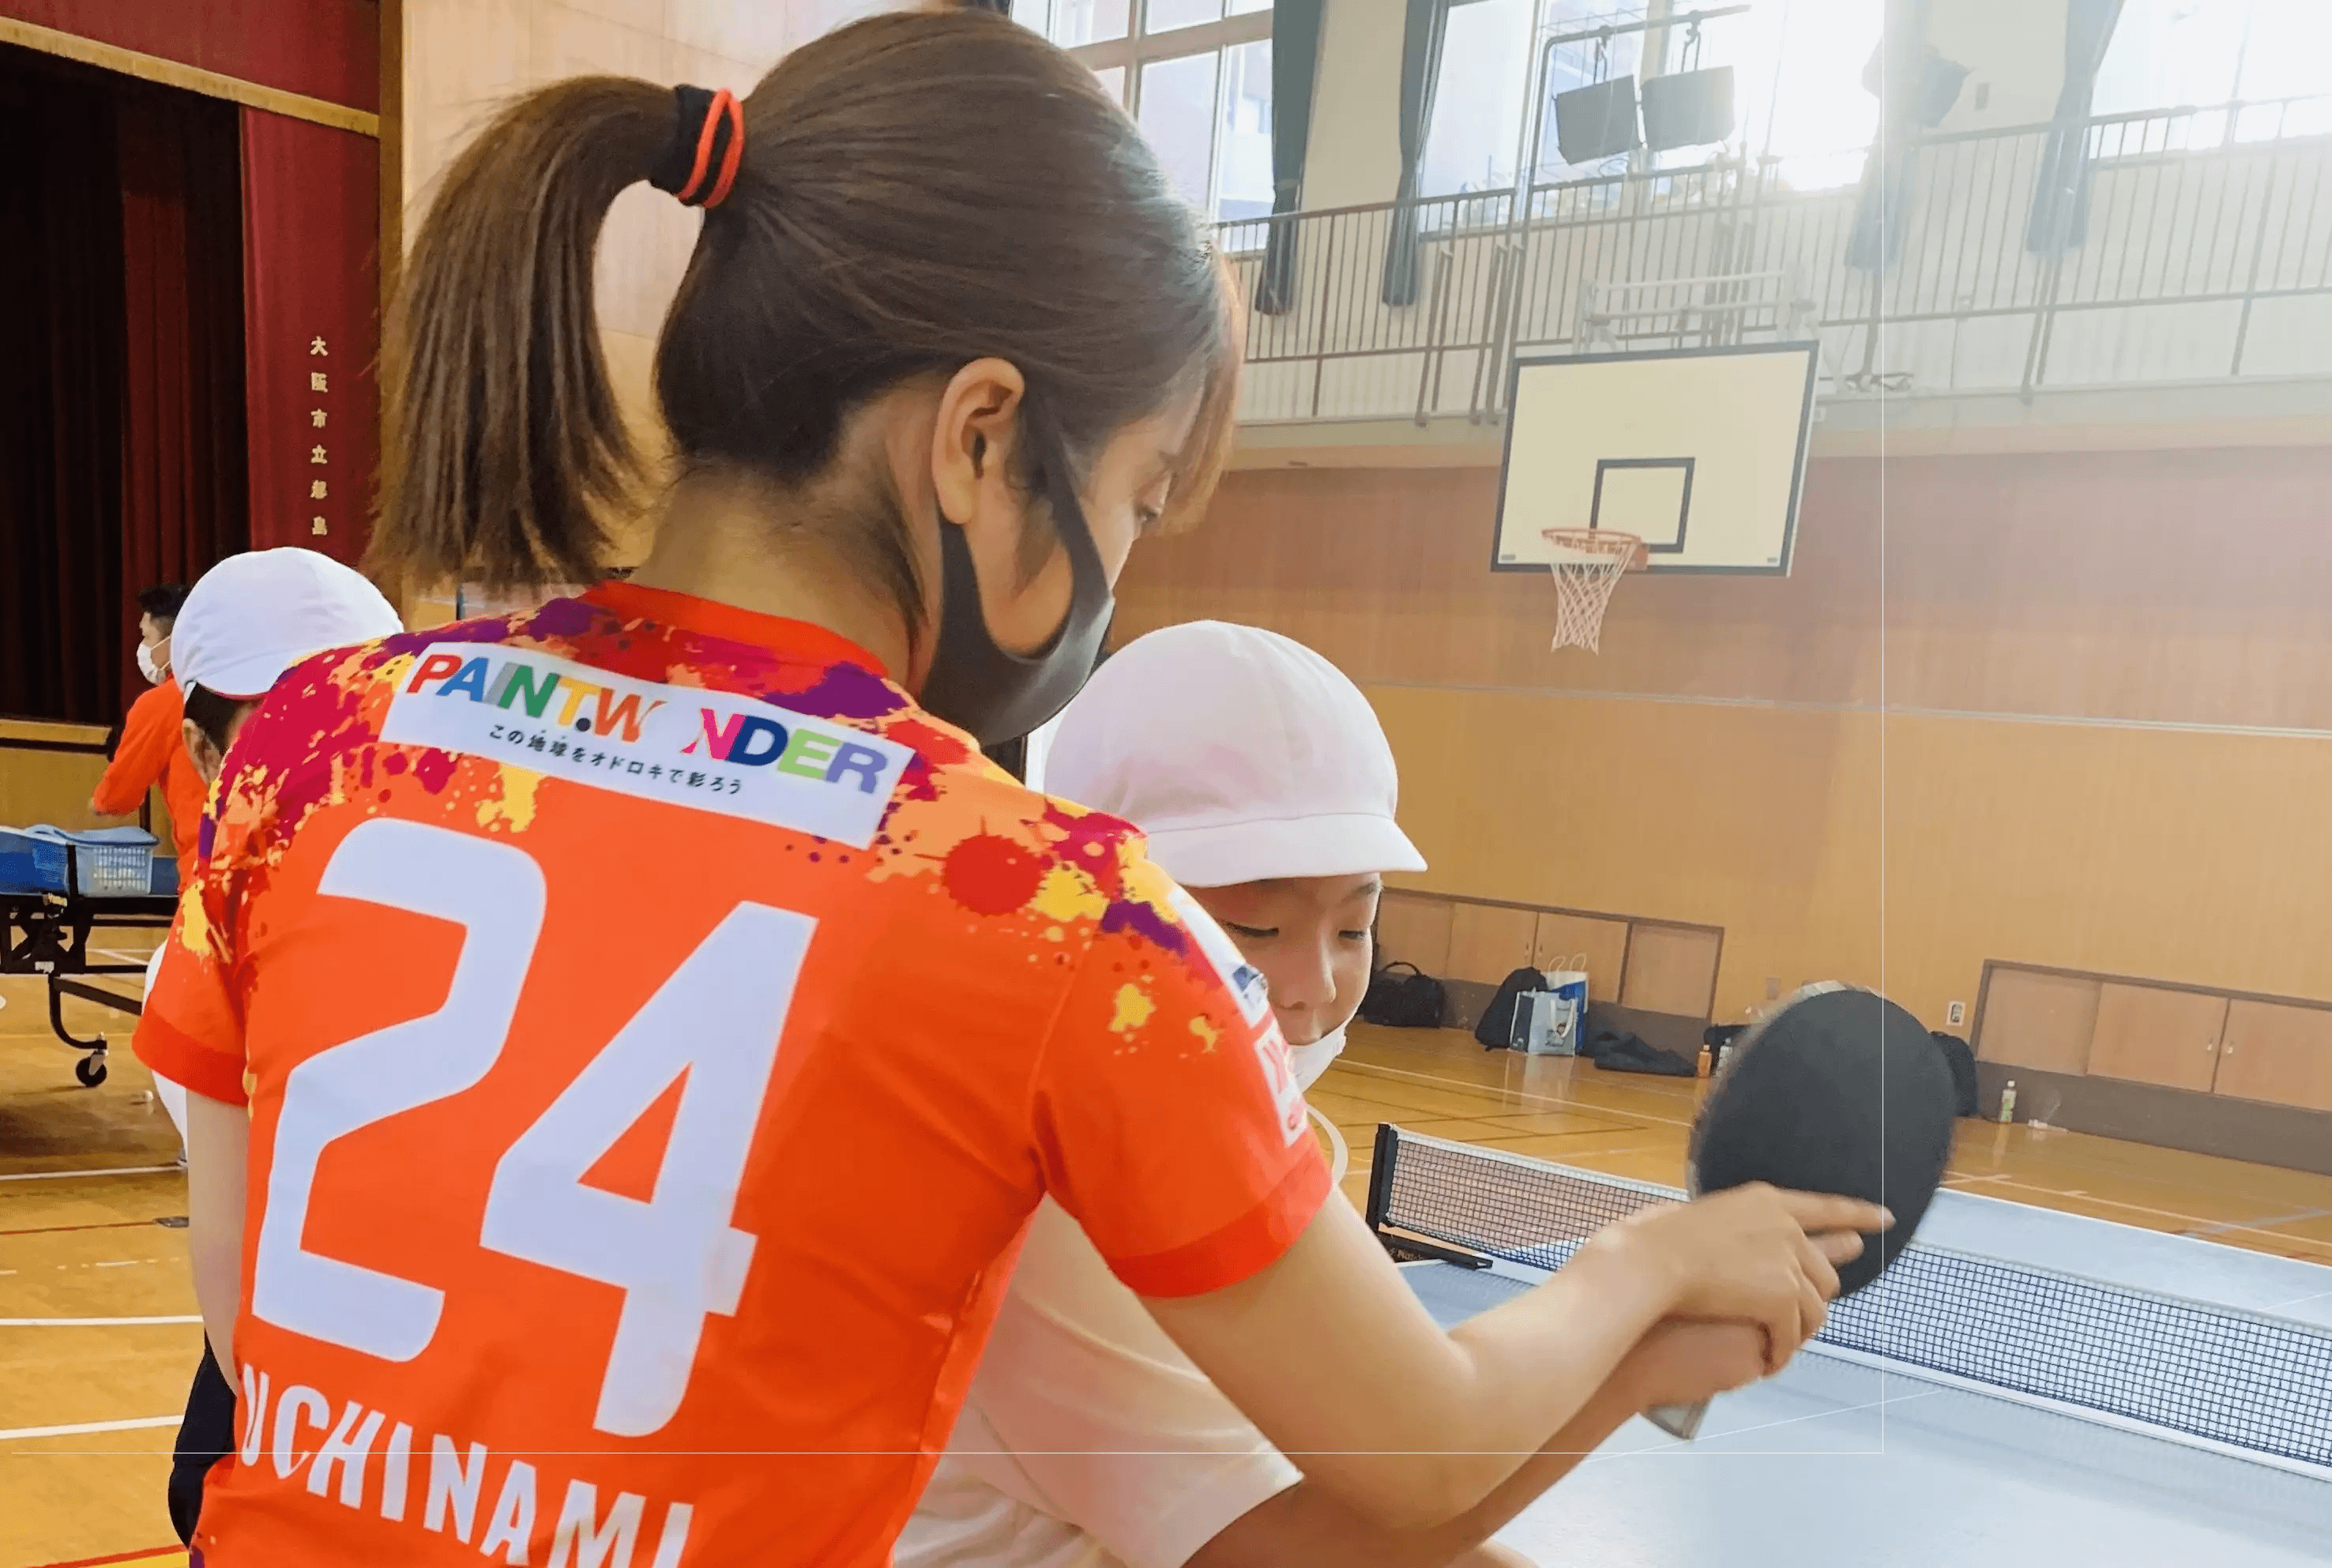 A Nippon Paint Mallets team member instructing a young player